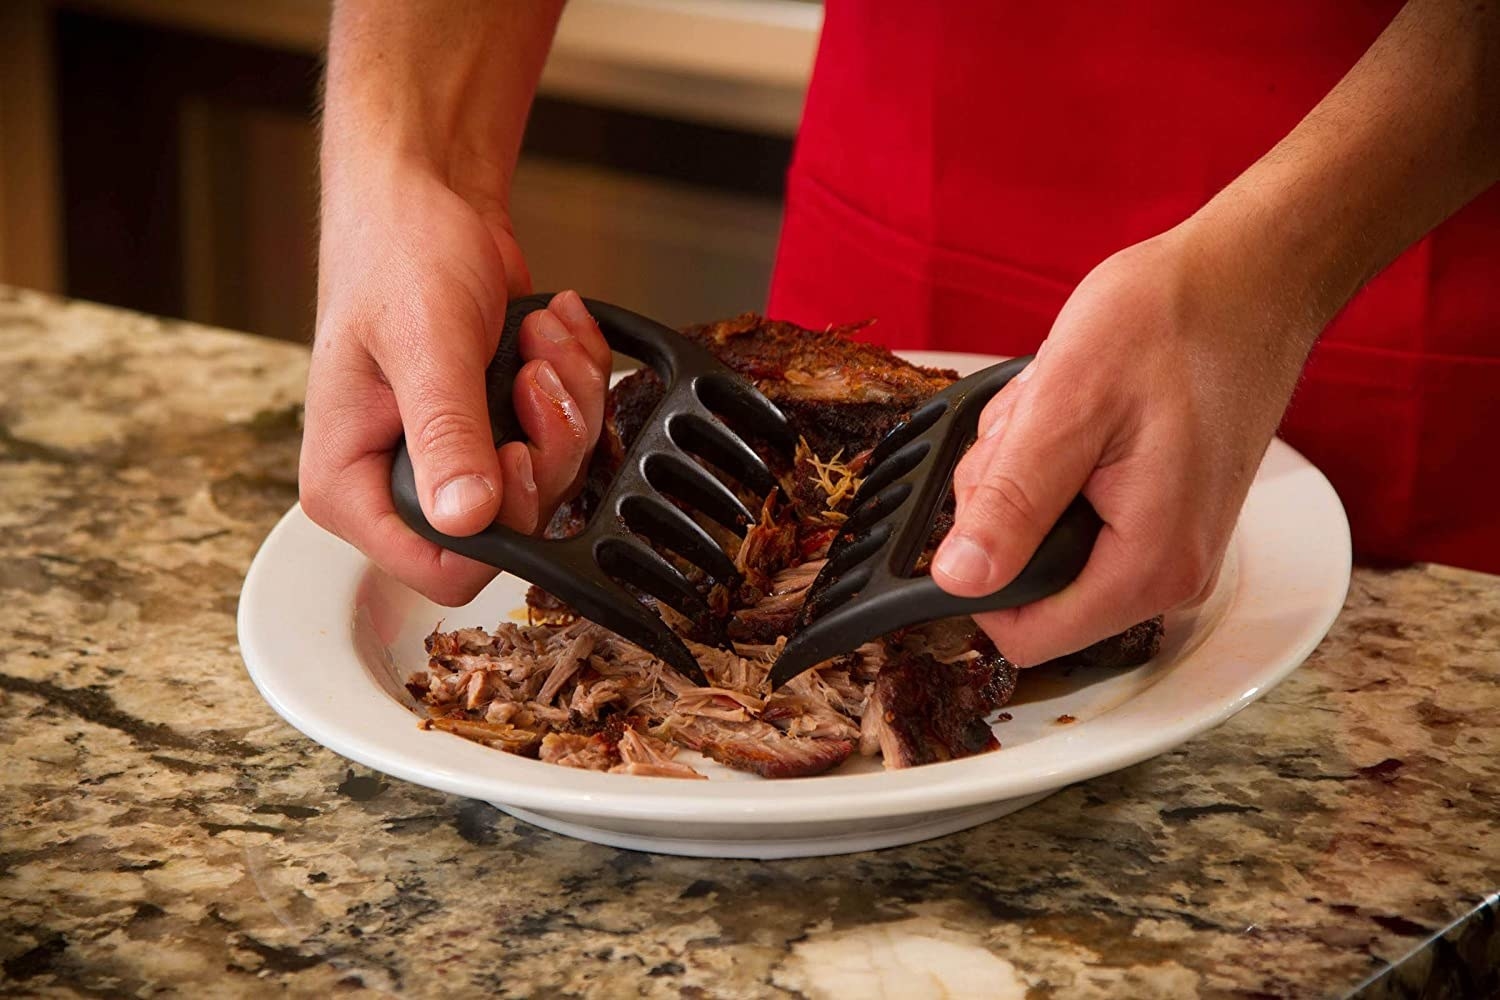 Hands use two black shredding claws to cut up pulled pork on a white plate